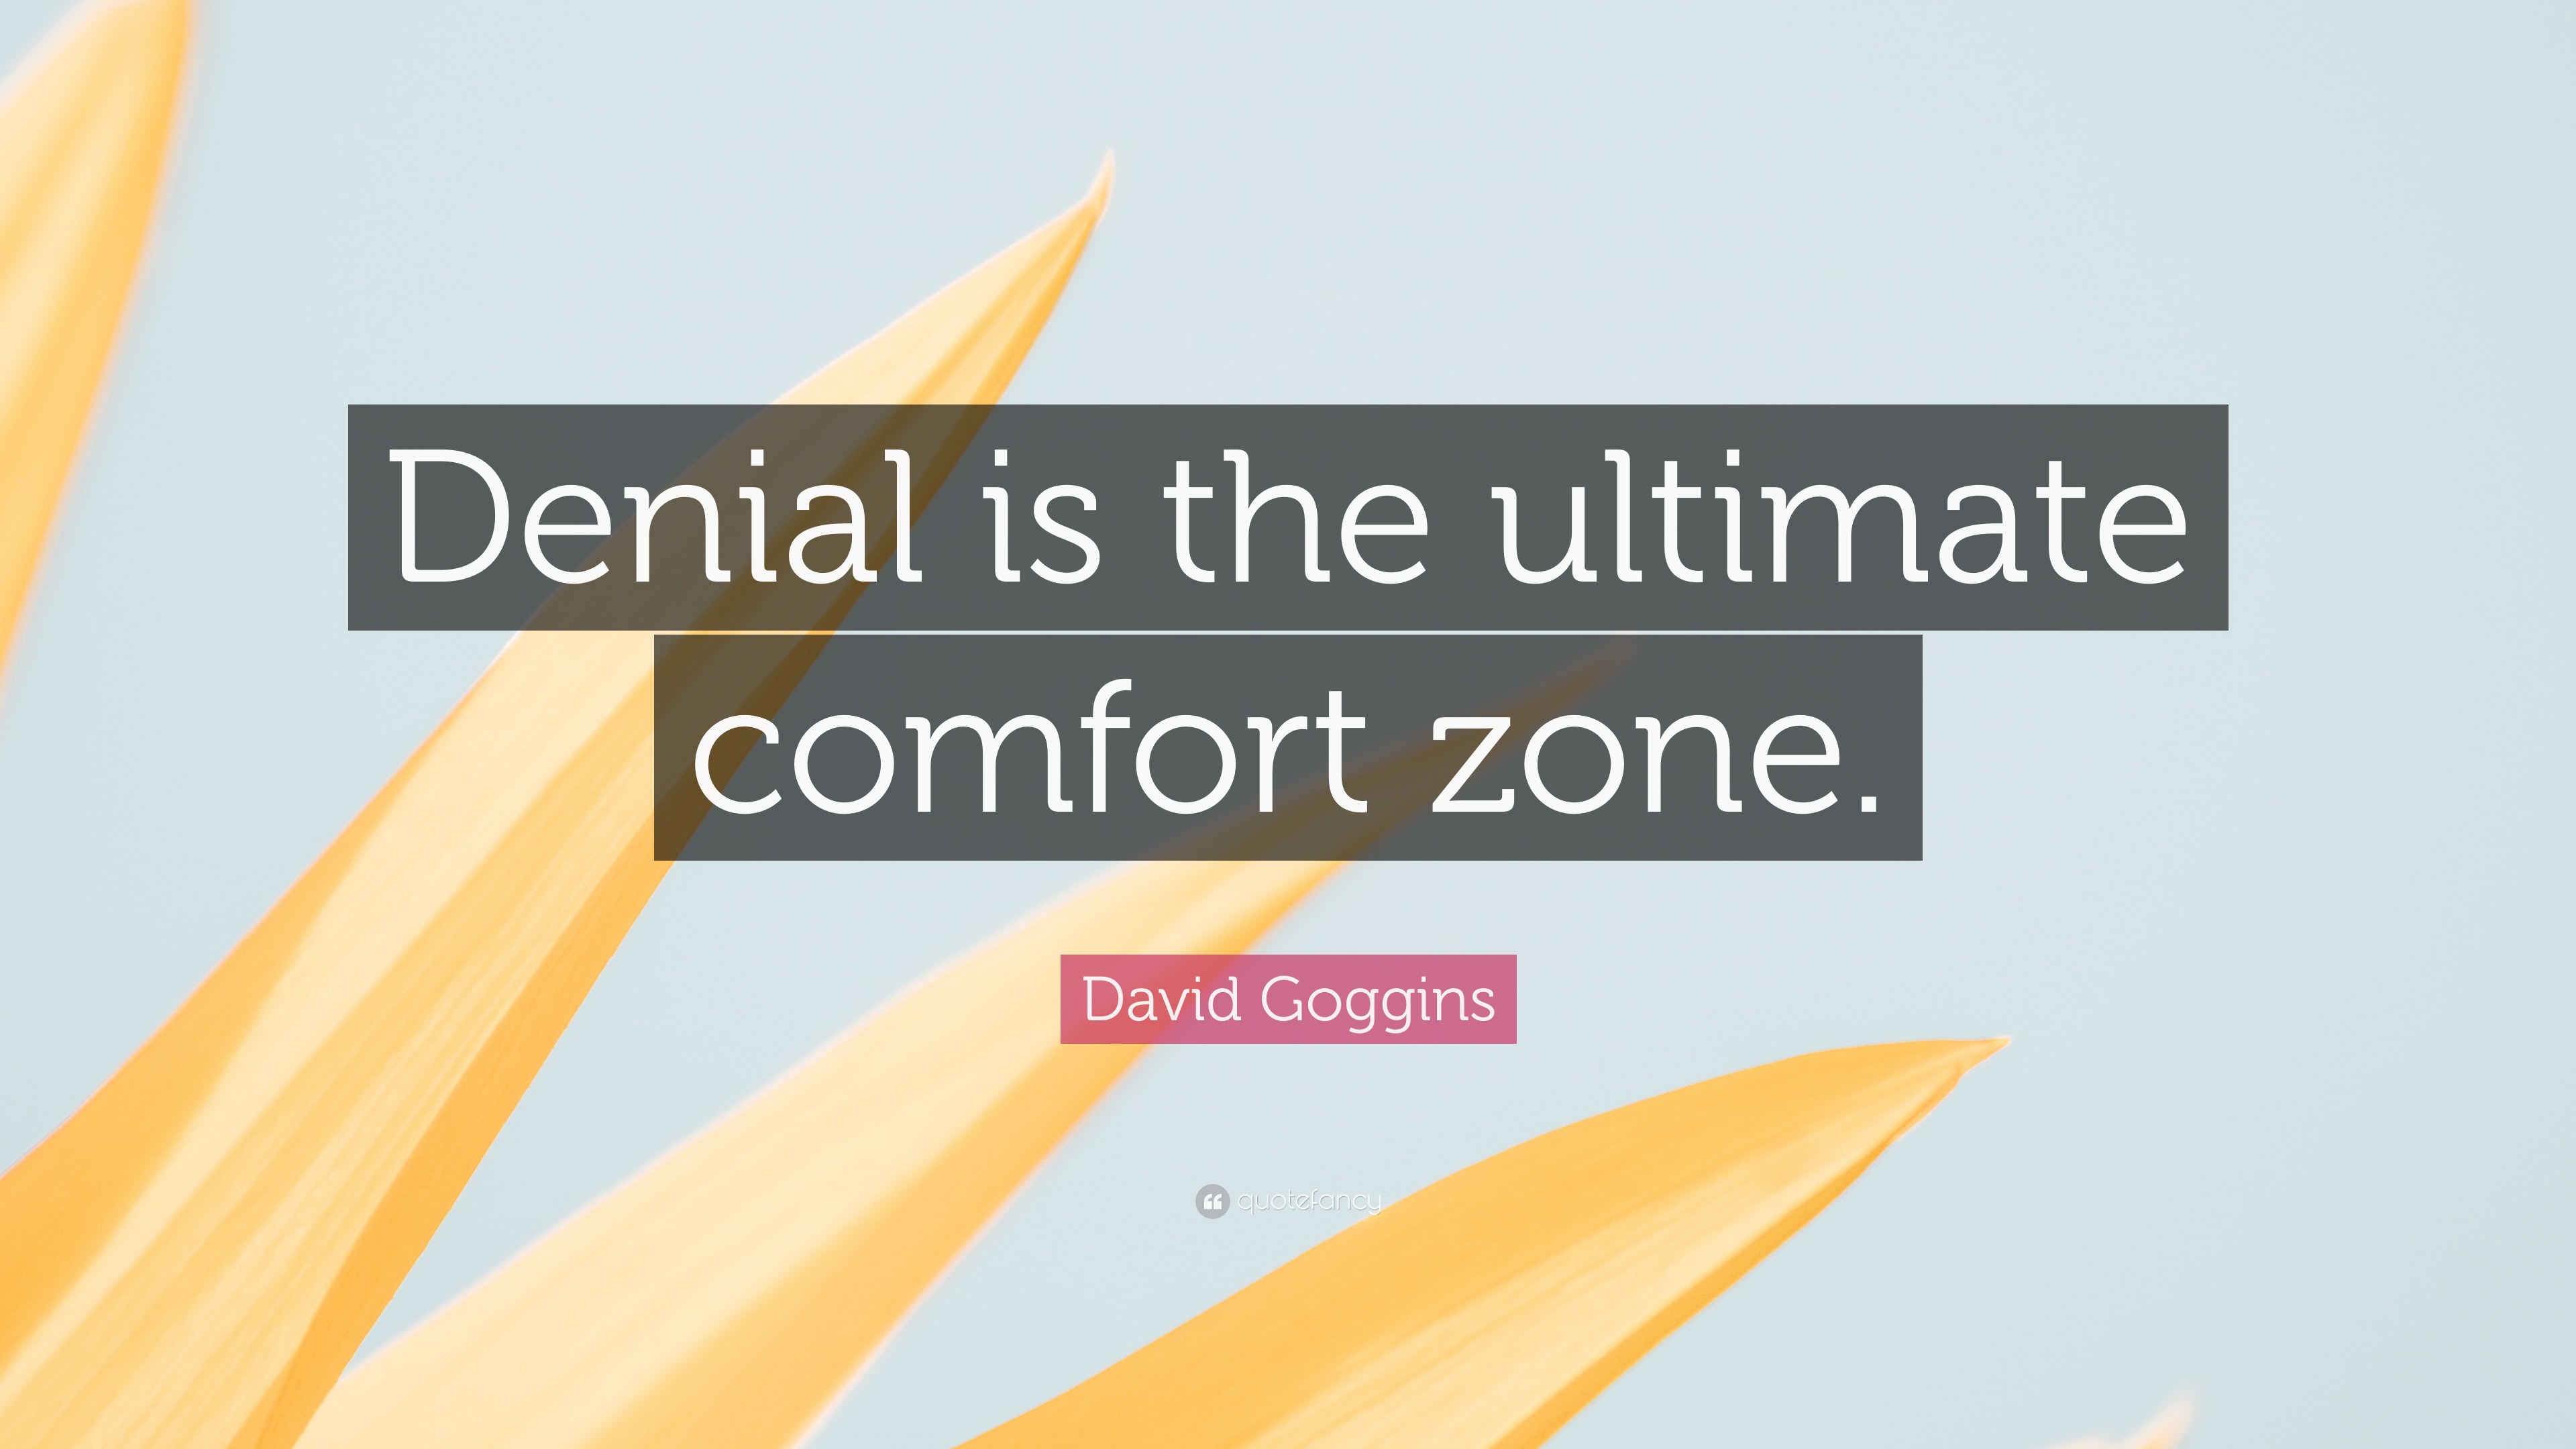 The Wisdom Post on X: Denial is the ultimate comfort zone